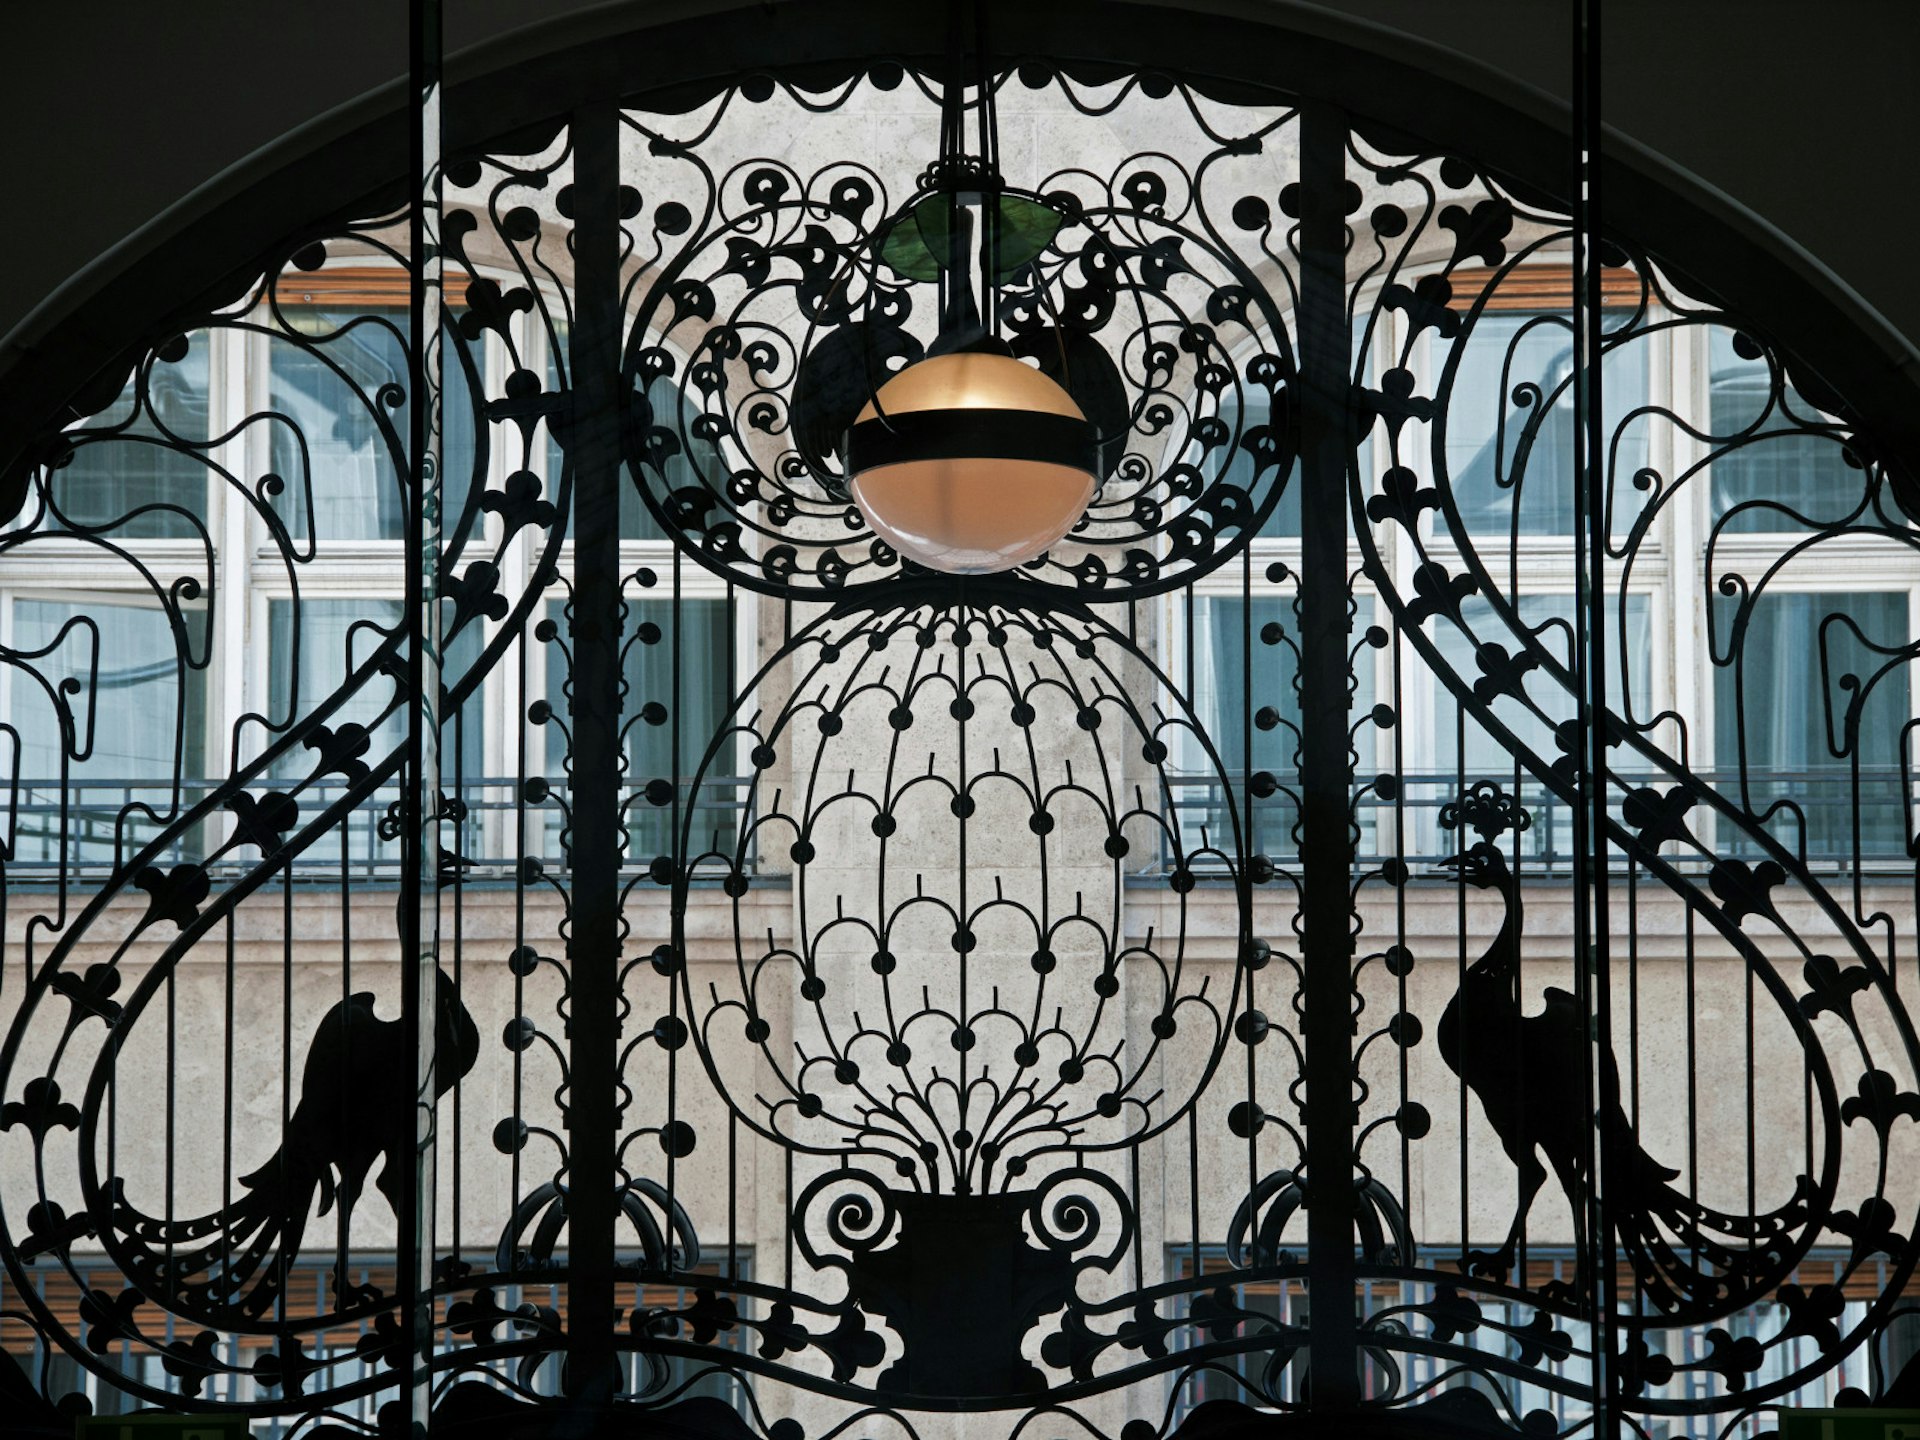 Art nouveau ironwork at the Gresham Palace Hotel © Krzysztof Dydynski / Lonely Planet Images / Getty Images